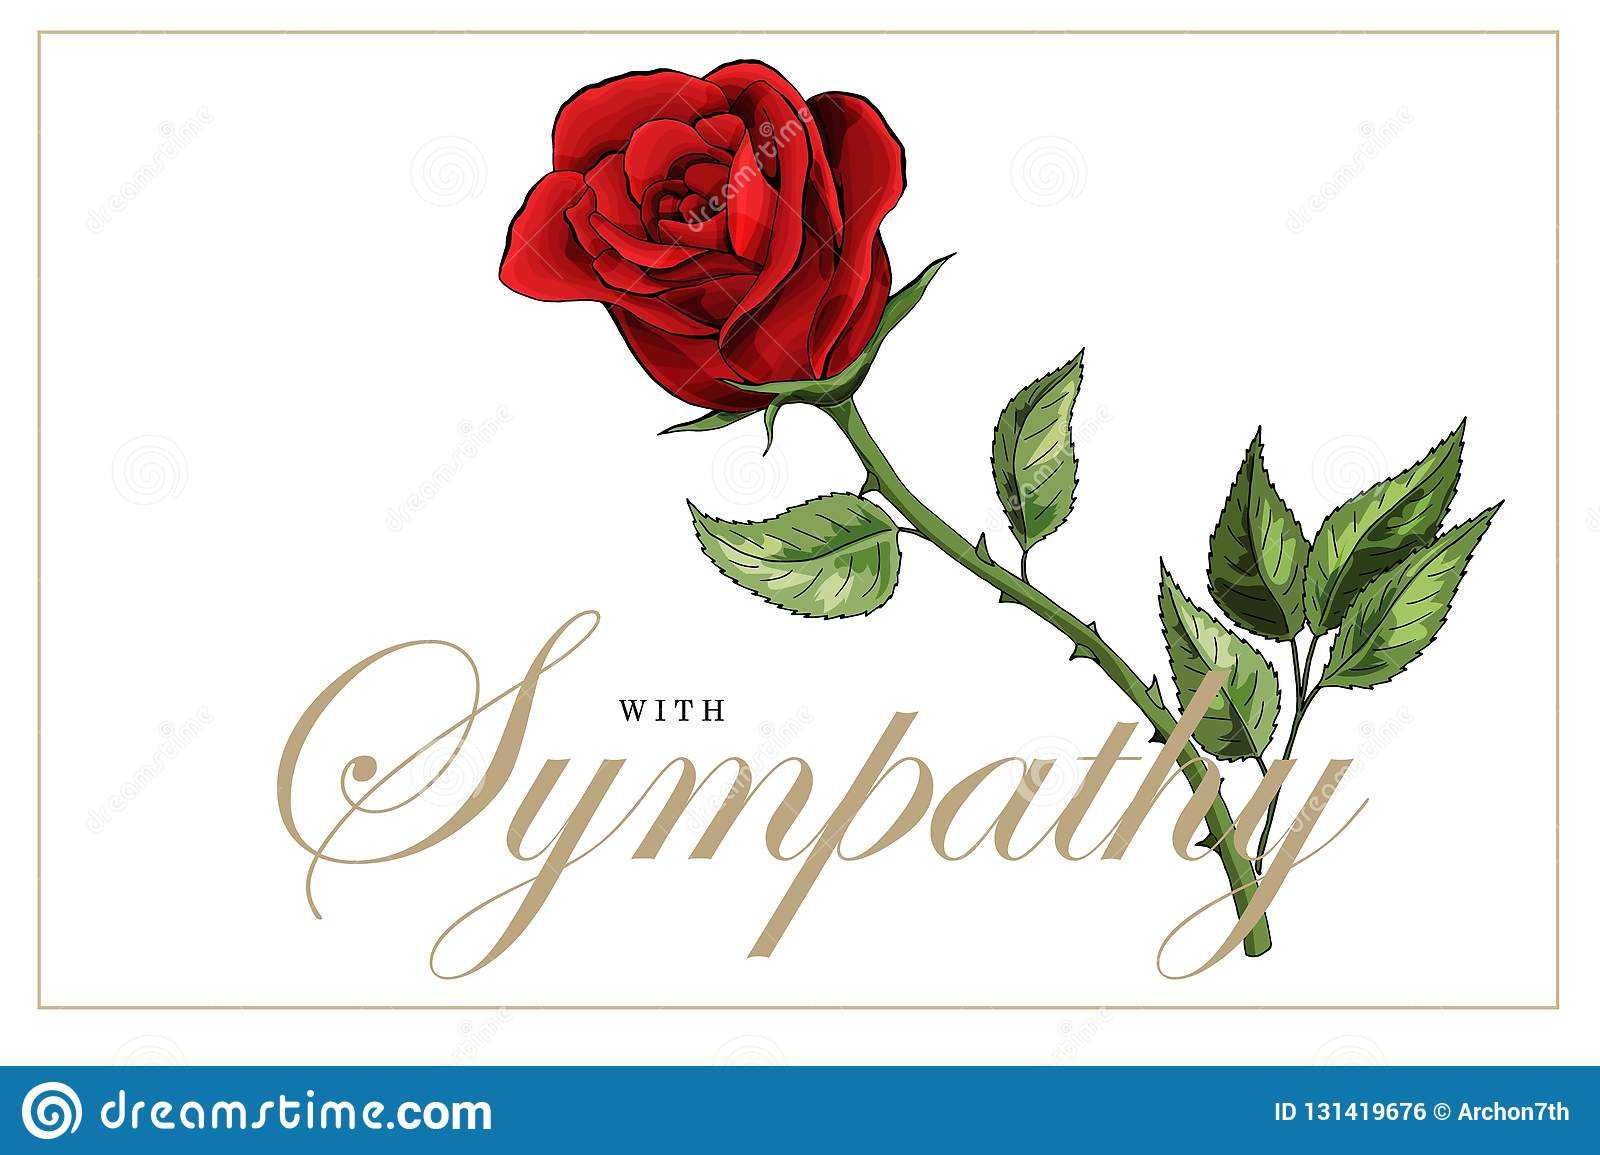 Condolences Sympathy Card Floral Red Roses Bouquet And With Sorry For Your Loss Card Template